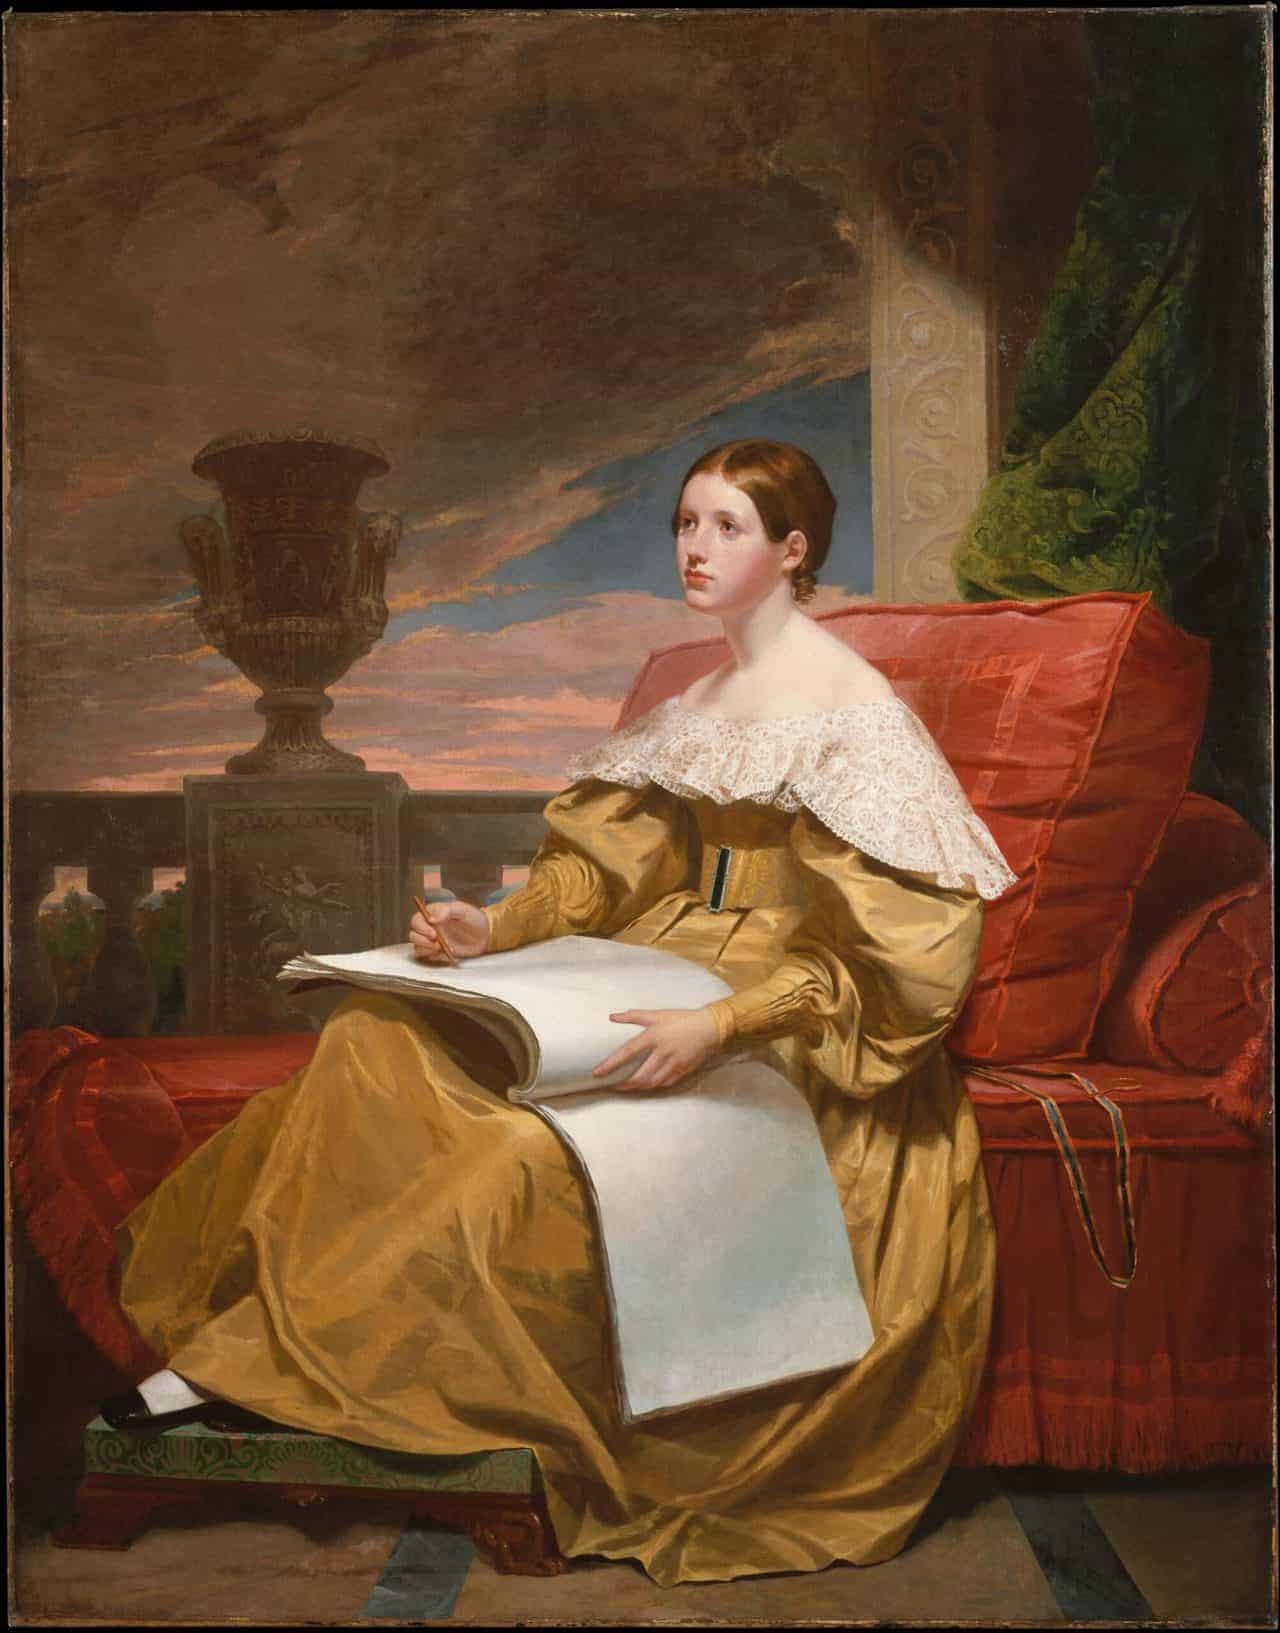 Susan Walker Morse (The Muse), 1836–37, Samuel F. B. Morse, The Metropolitan Museum of Art (article on art therapy)